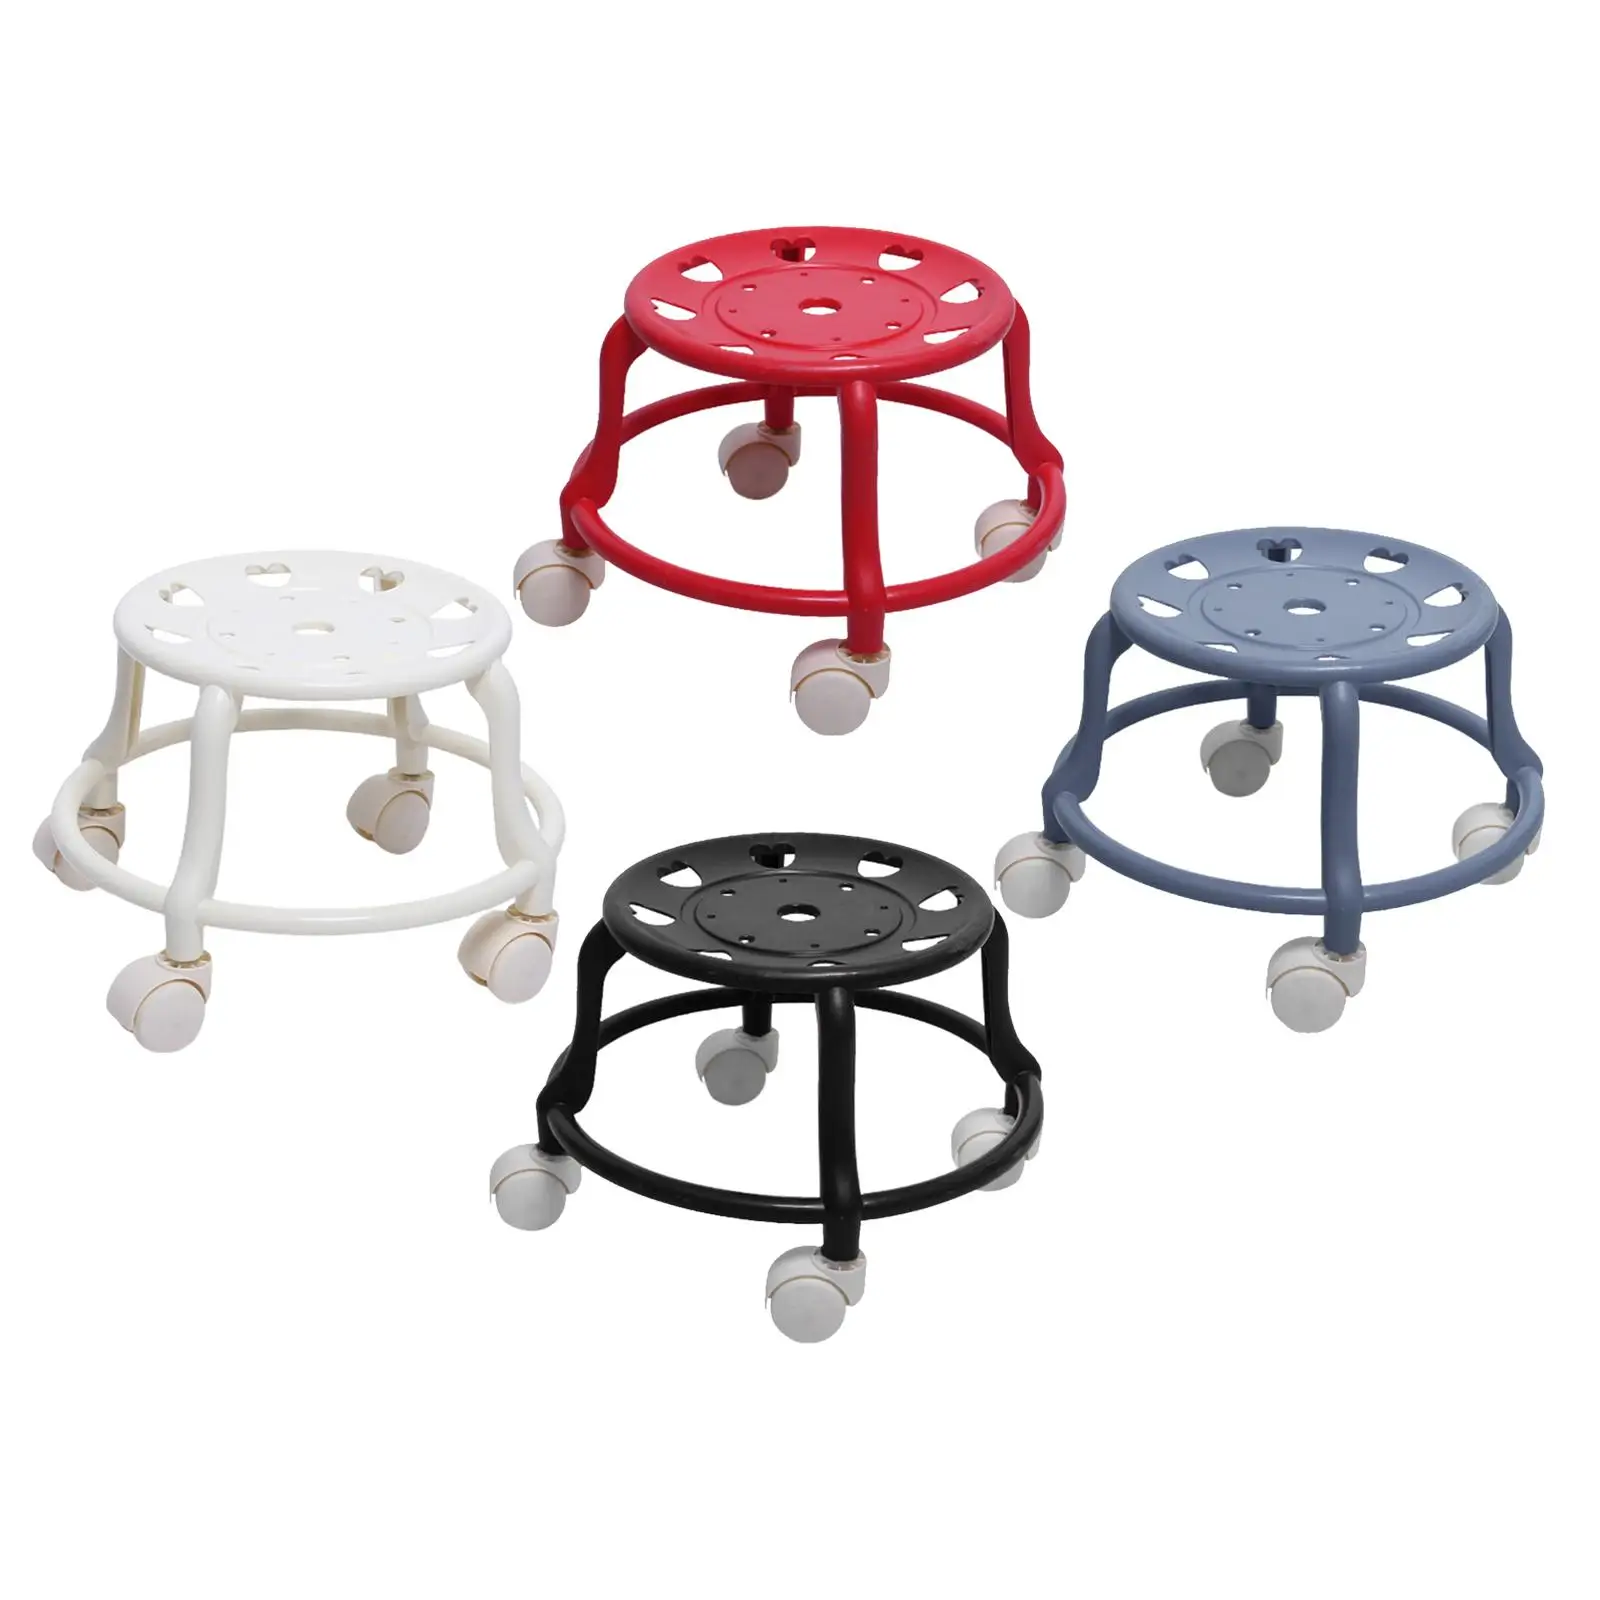 360 Rotating Roller Stool Easy to Move Low Noise with Universal Wheels Swivel Roller Seat Round Sliding Stool for Home Fitness